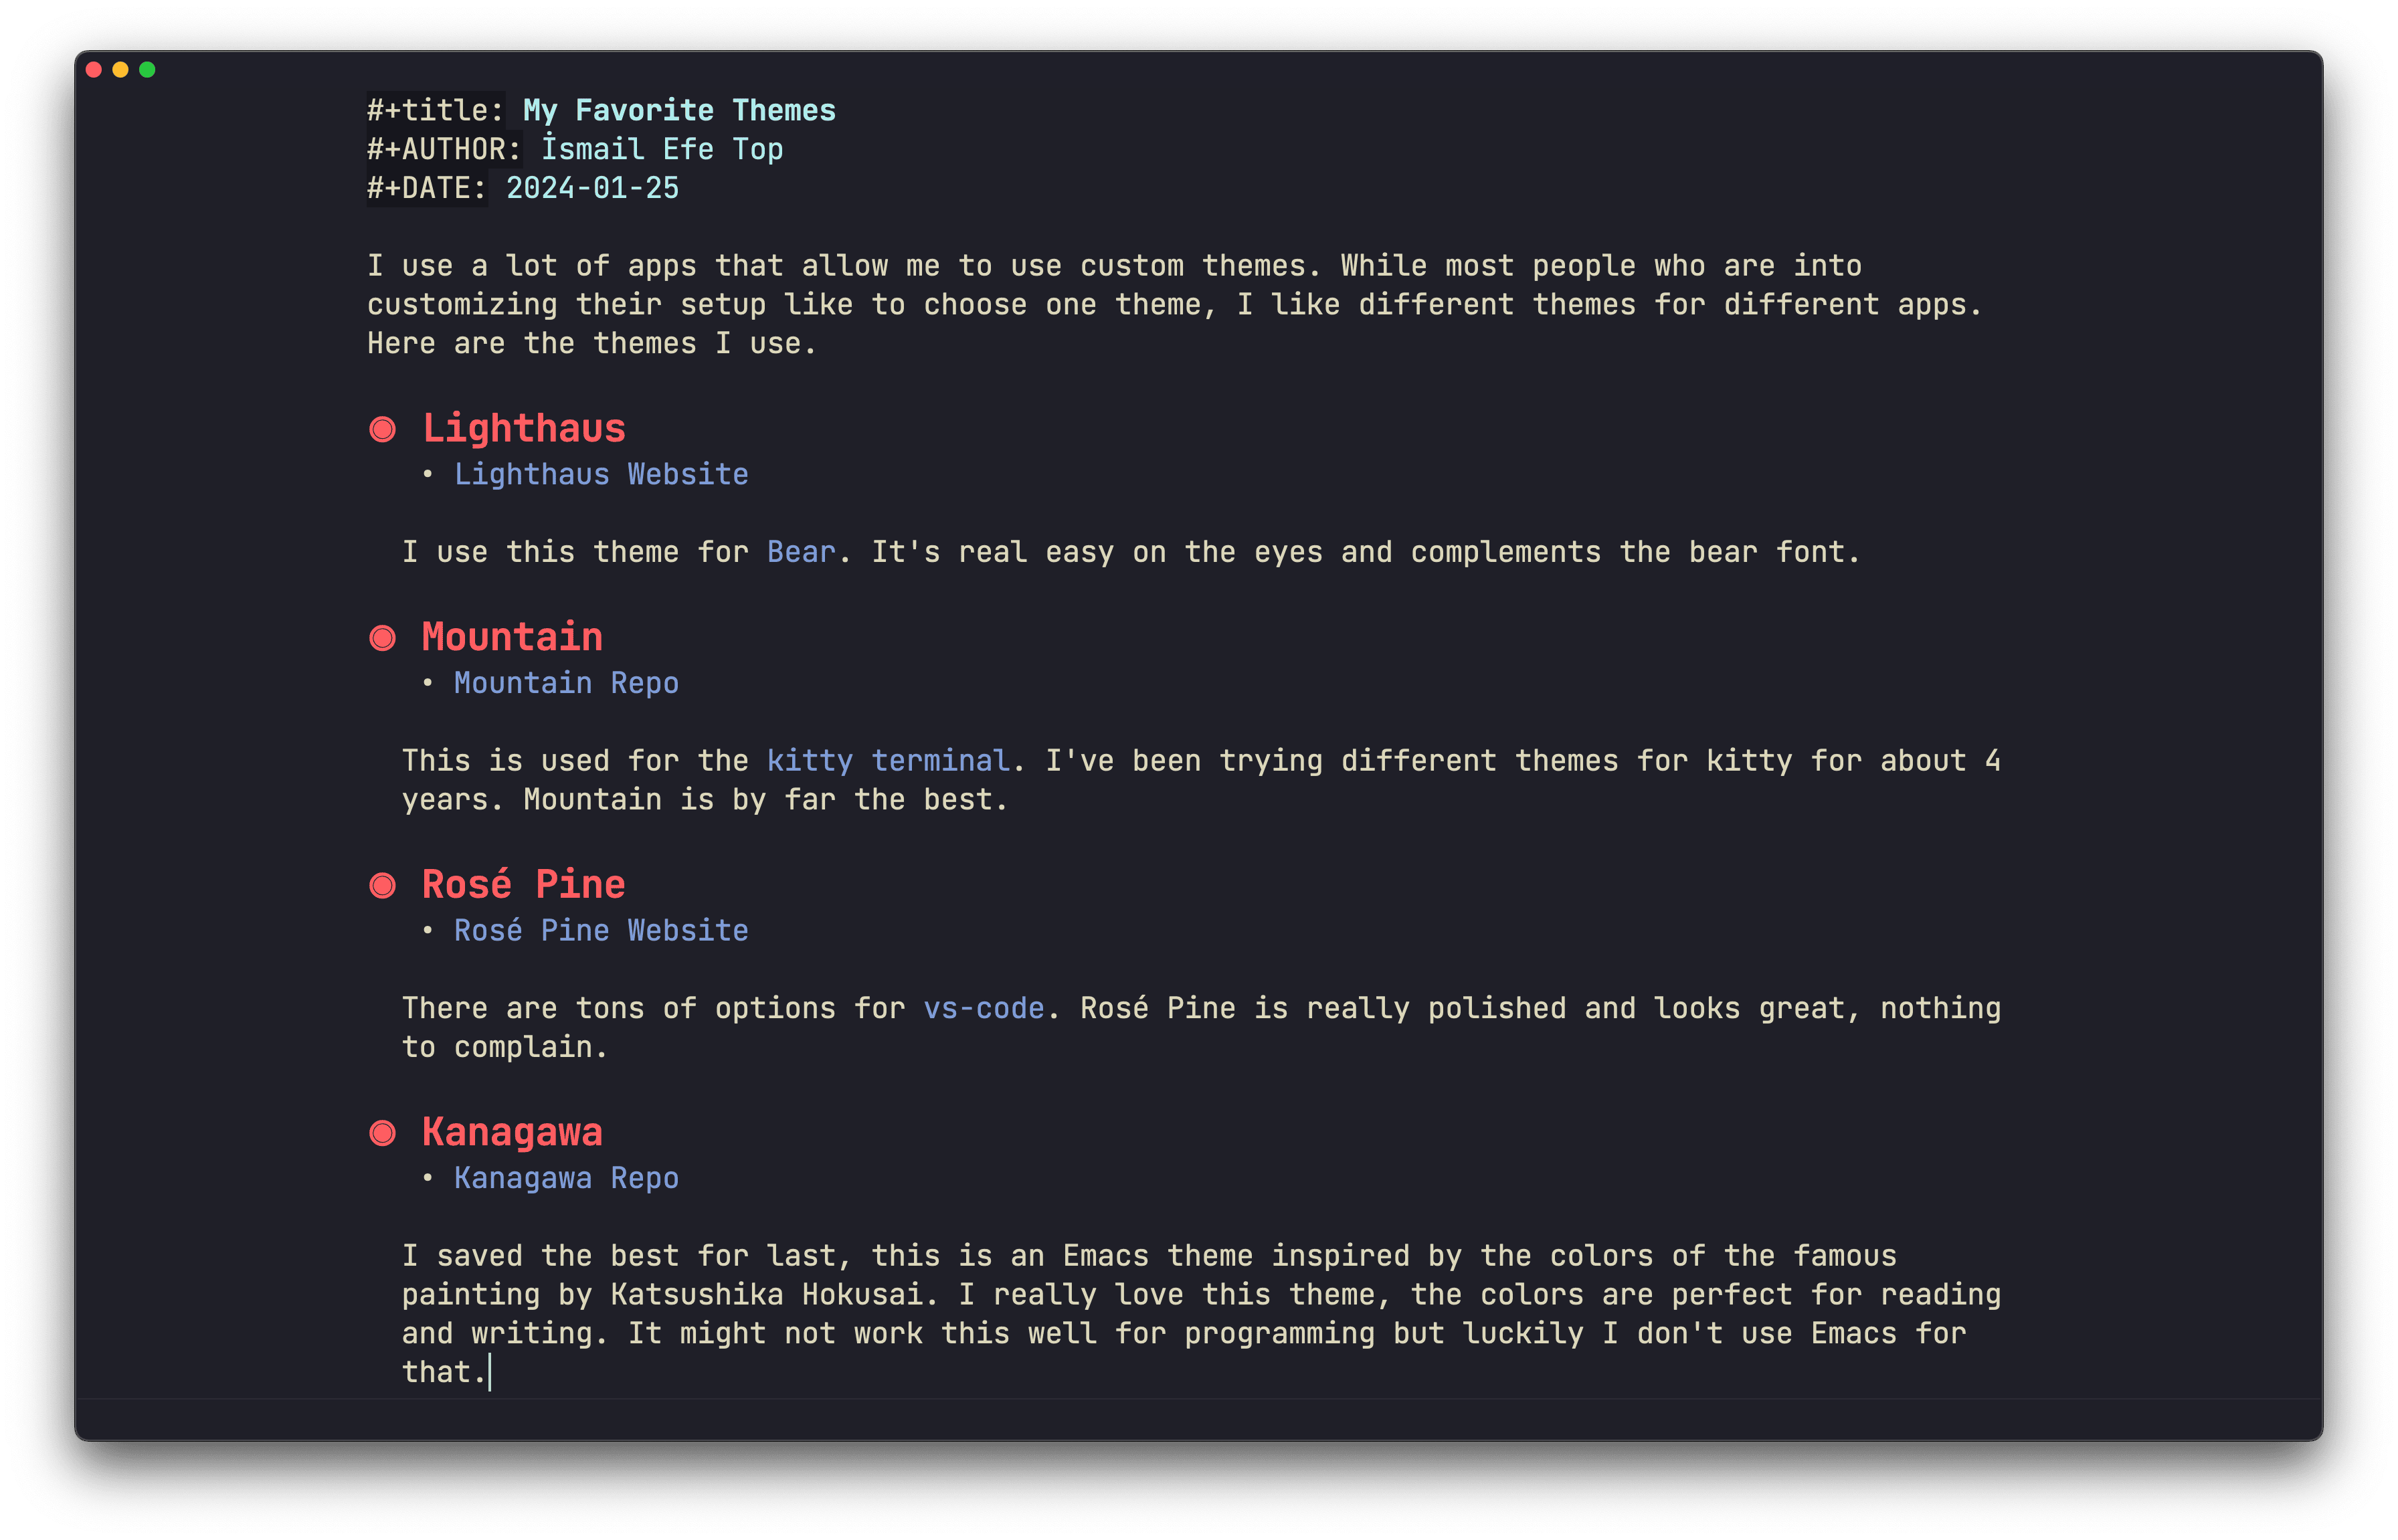 Image of Emacs, my writing and reading app.